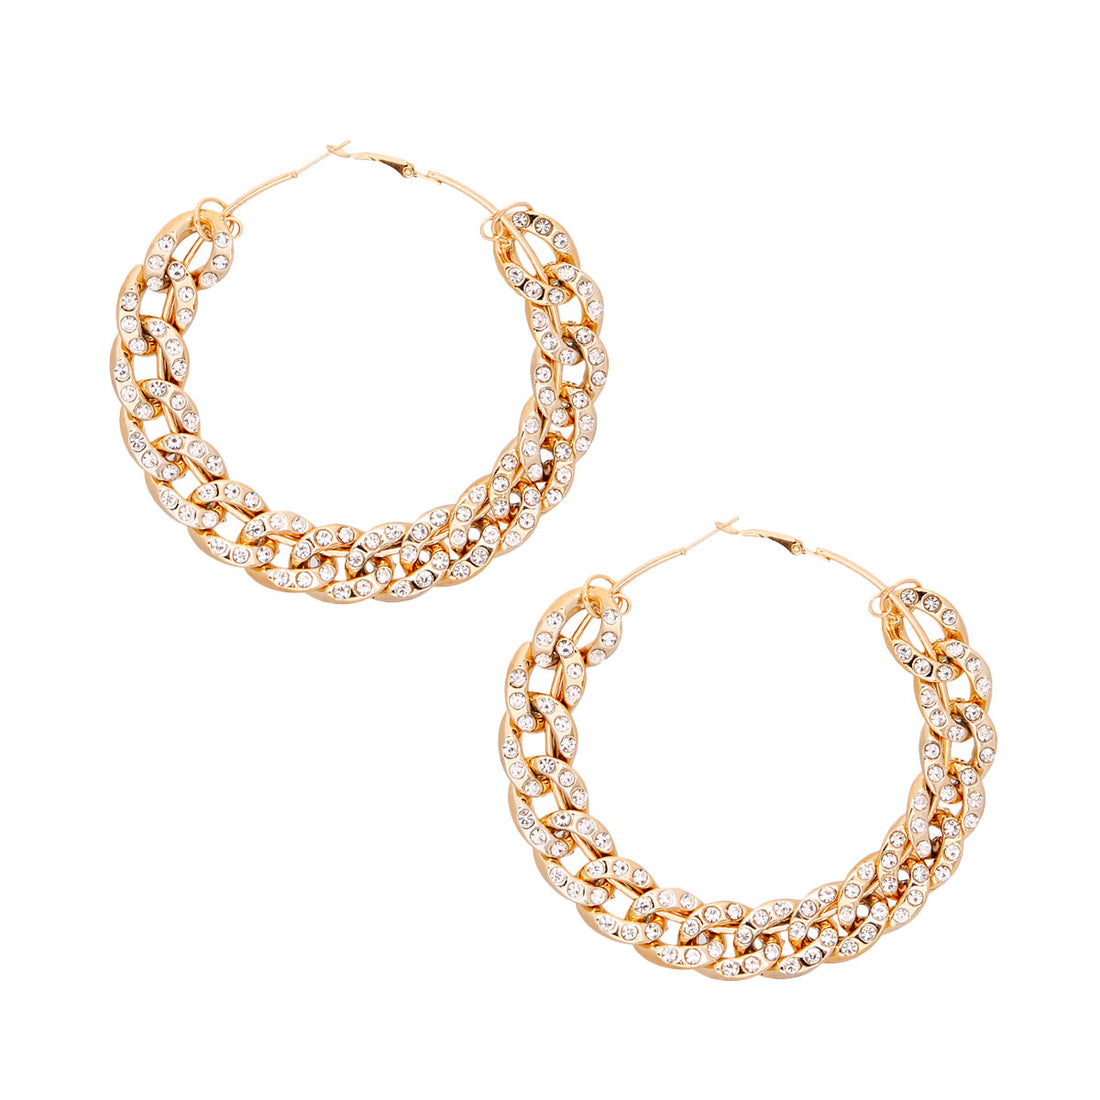 2.75 inch Gold Pave Stone Hoops